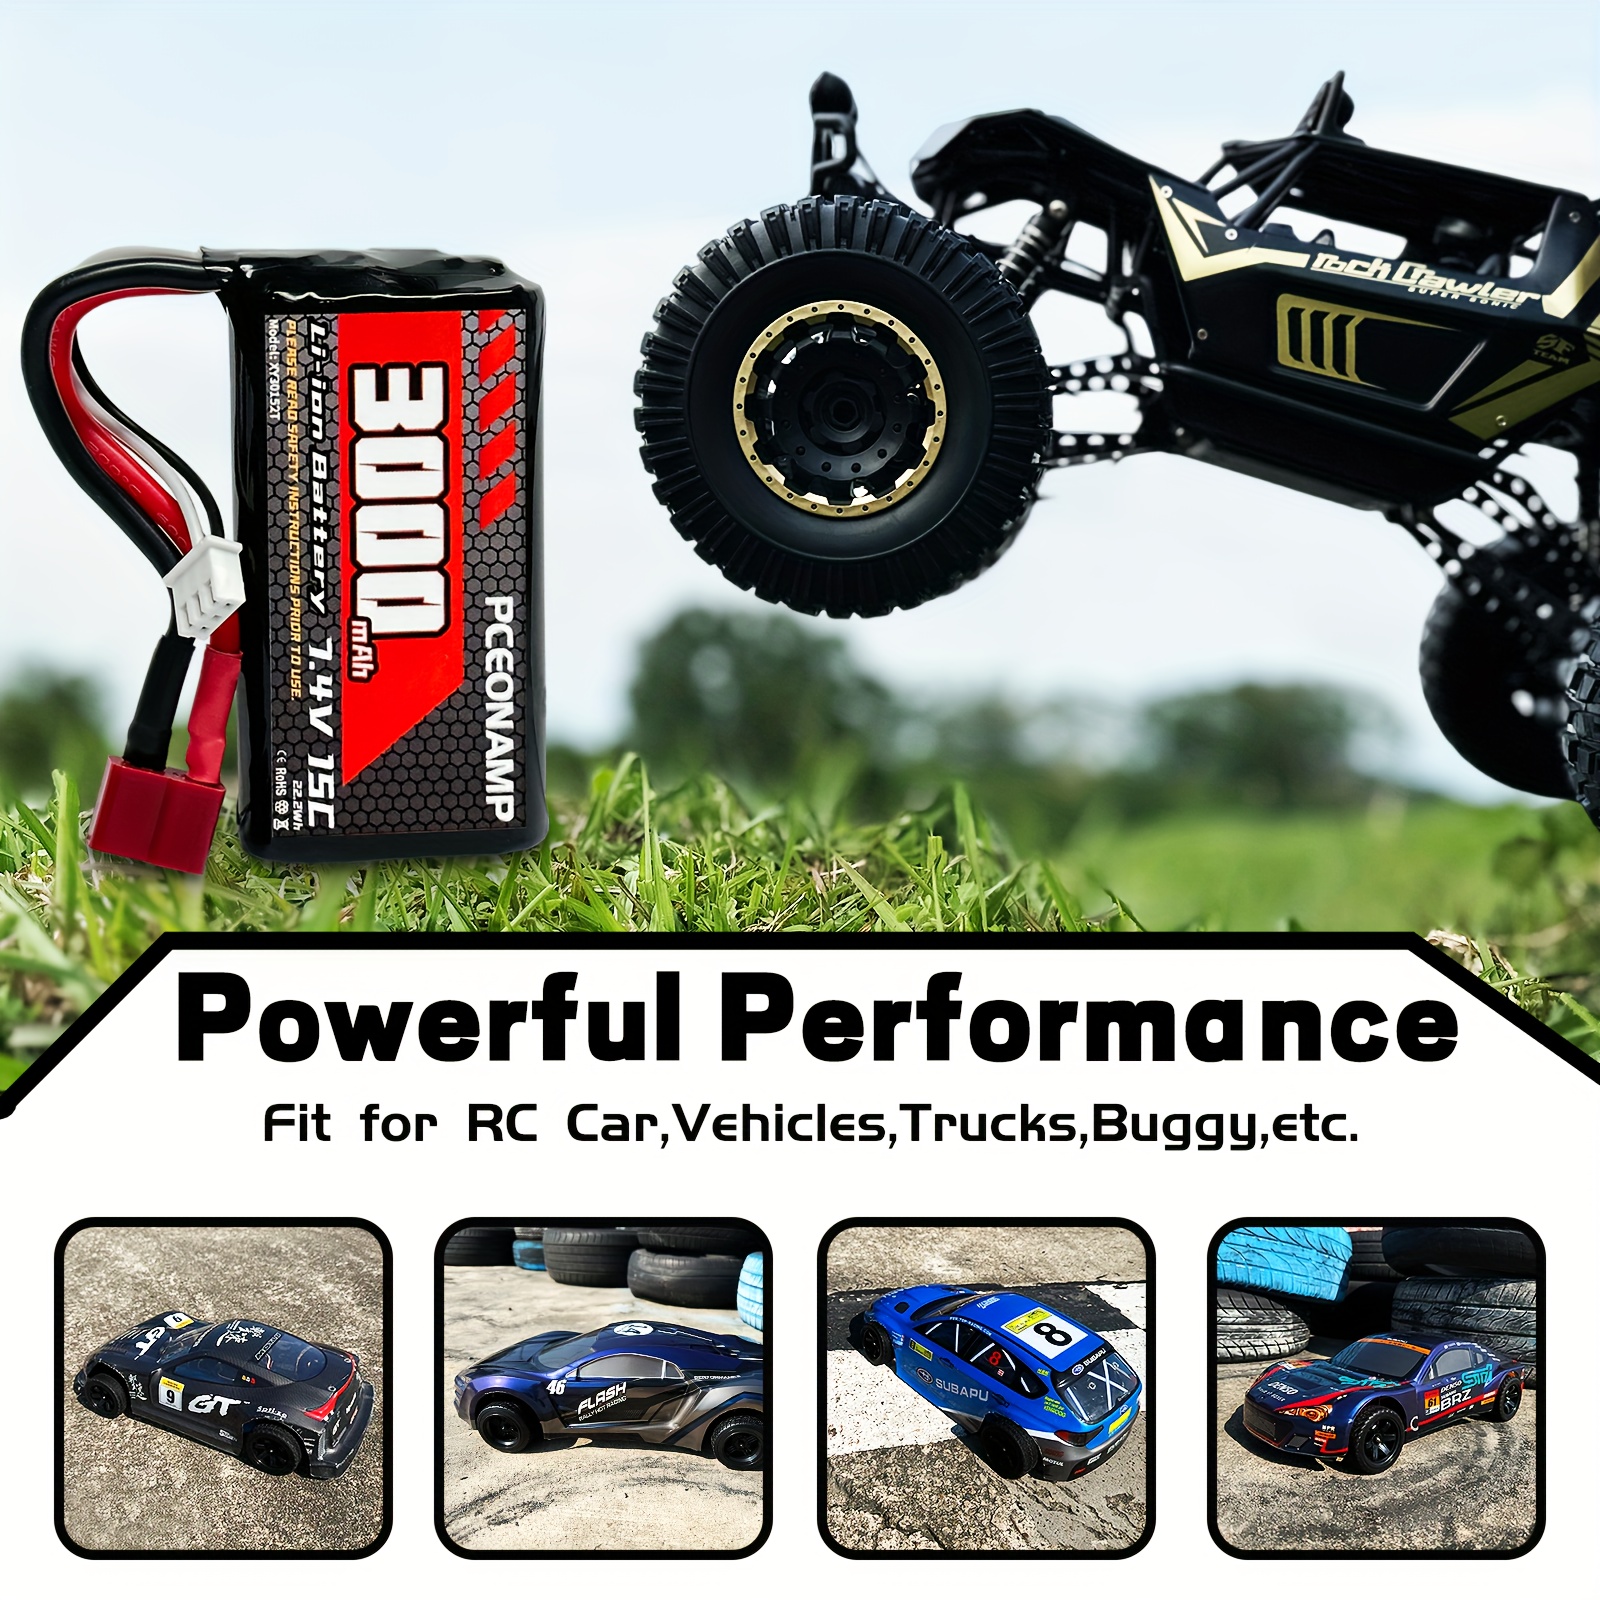 7.4V.3000mAh. 2S1P.18500 Lithium Battery. For,T socket, SM-2P,3P, 4P,  JST,XT30, Electric Remote Control Boat, Toy Racing Car